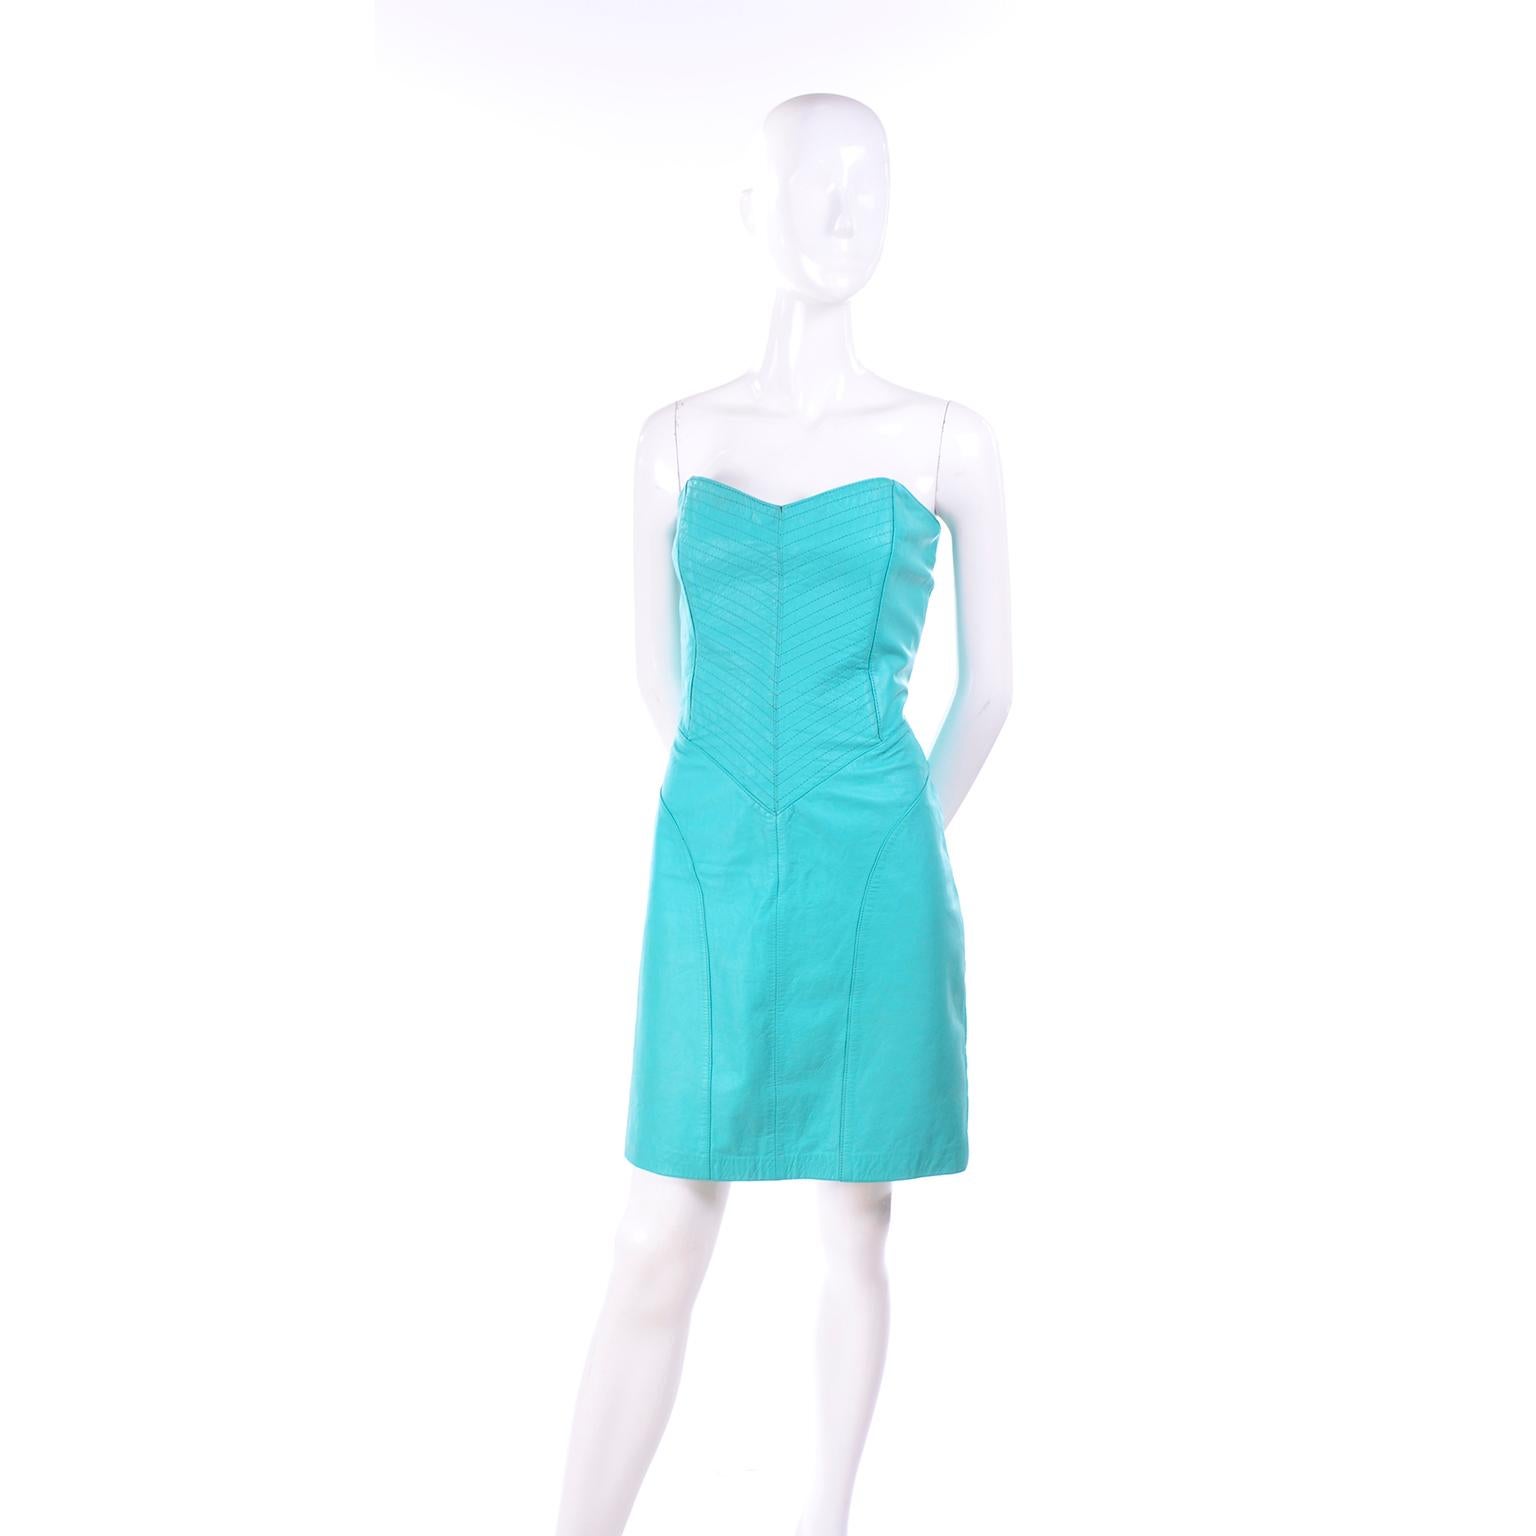 This is a vintage Yucatan Bay 1980's Strapless Turquoise Leather Dress	from the 1980's. This strapless leather dress has interesting top-stitching and detailed seams. The dress can be dressed up for evenings or worn as a day dress!  This great 80's